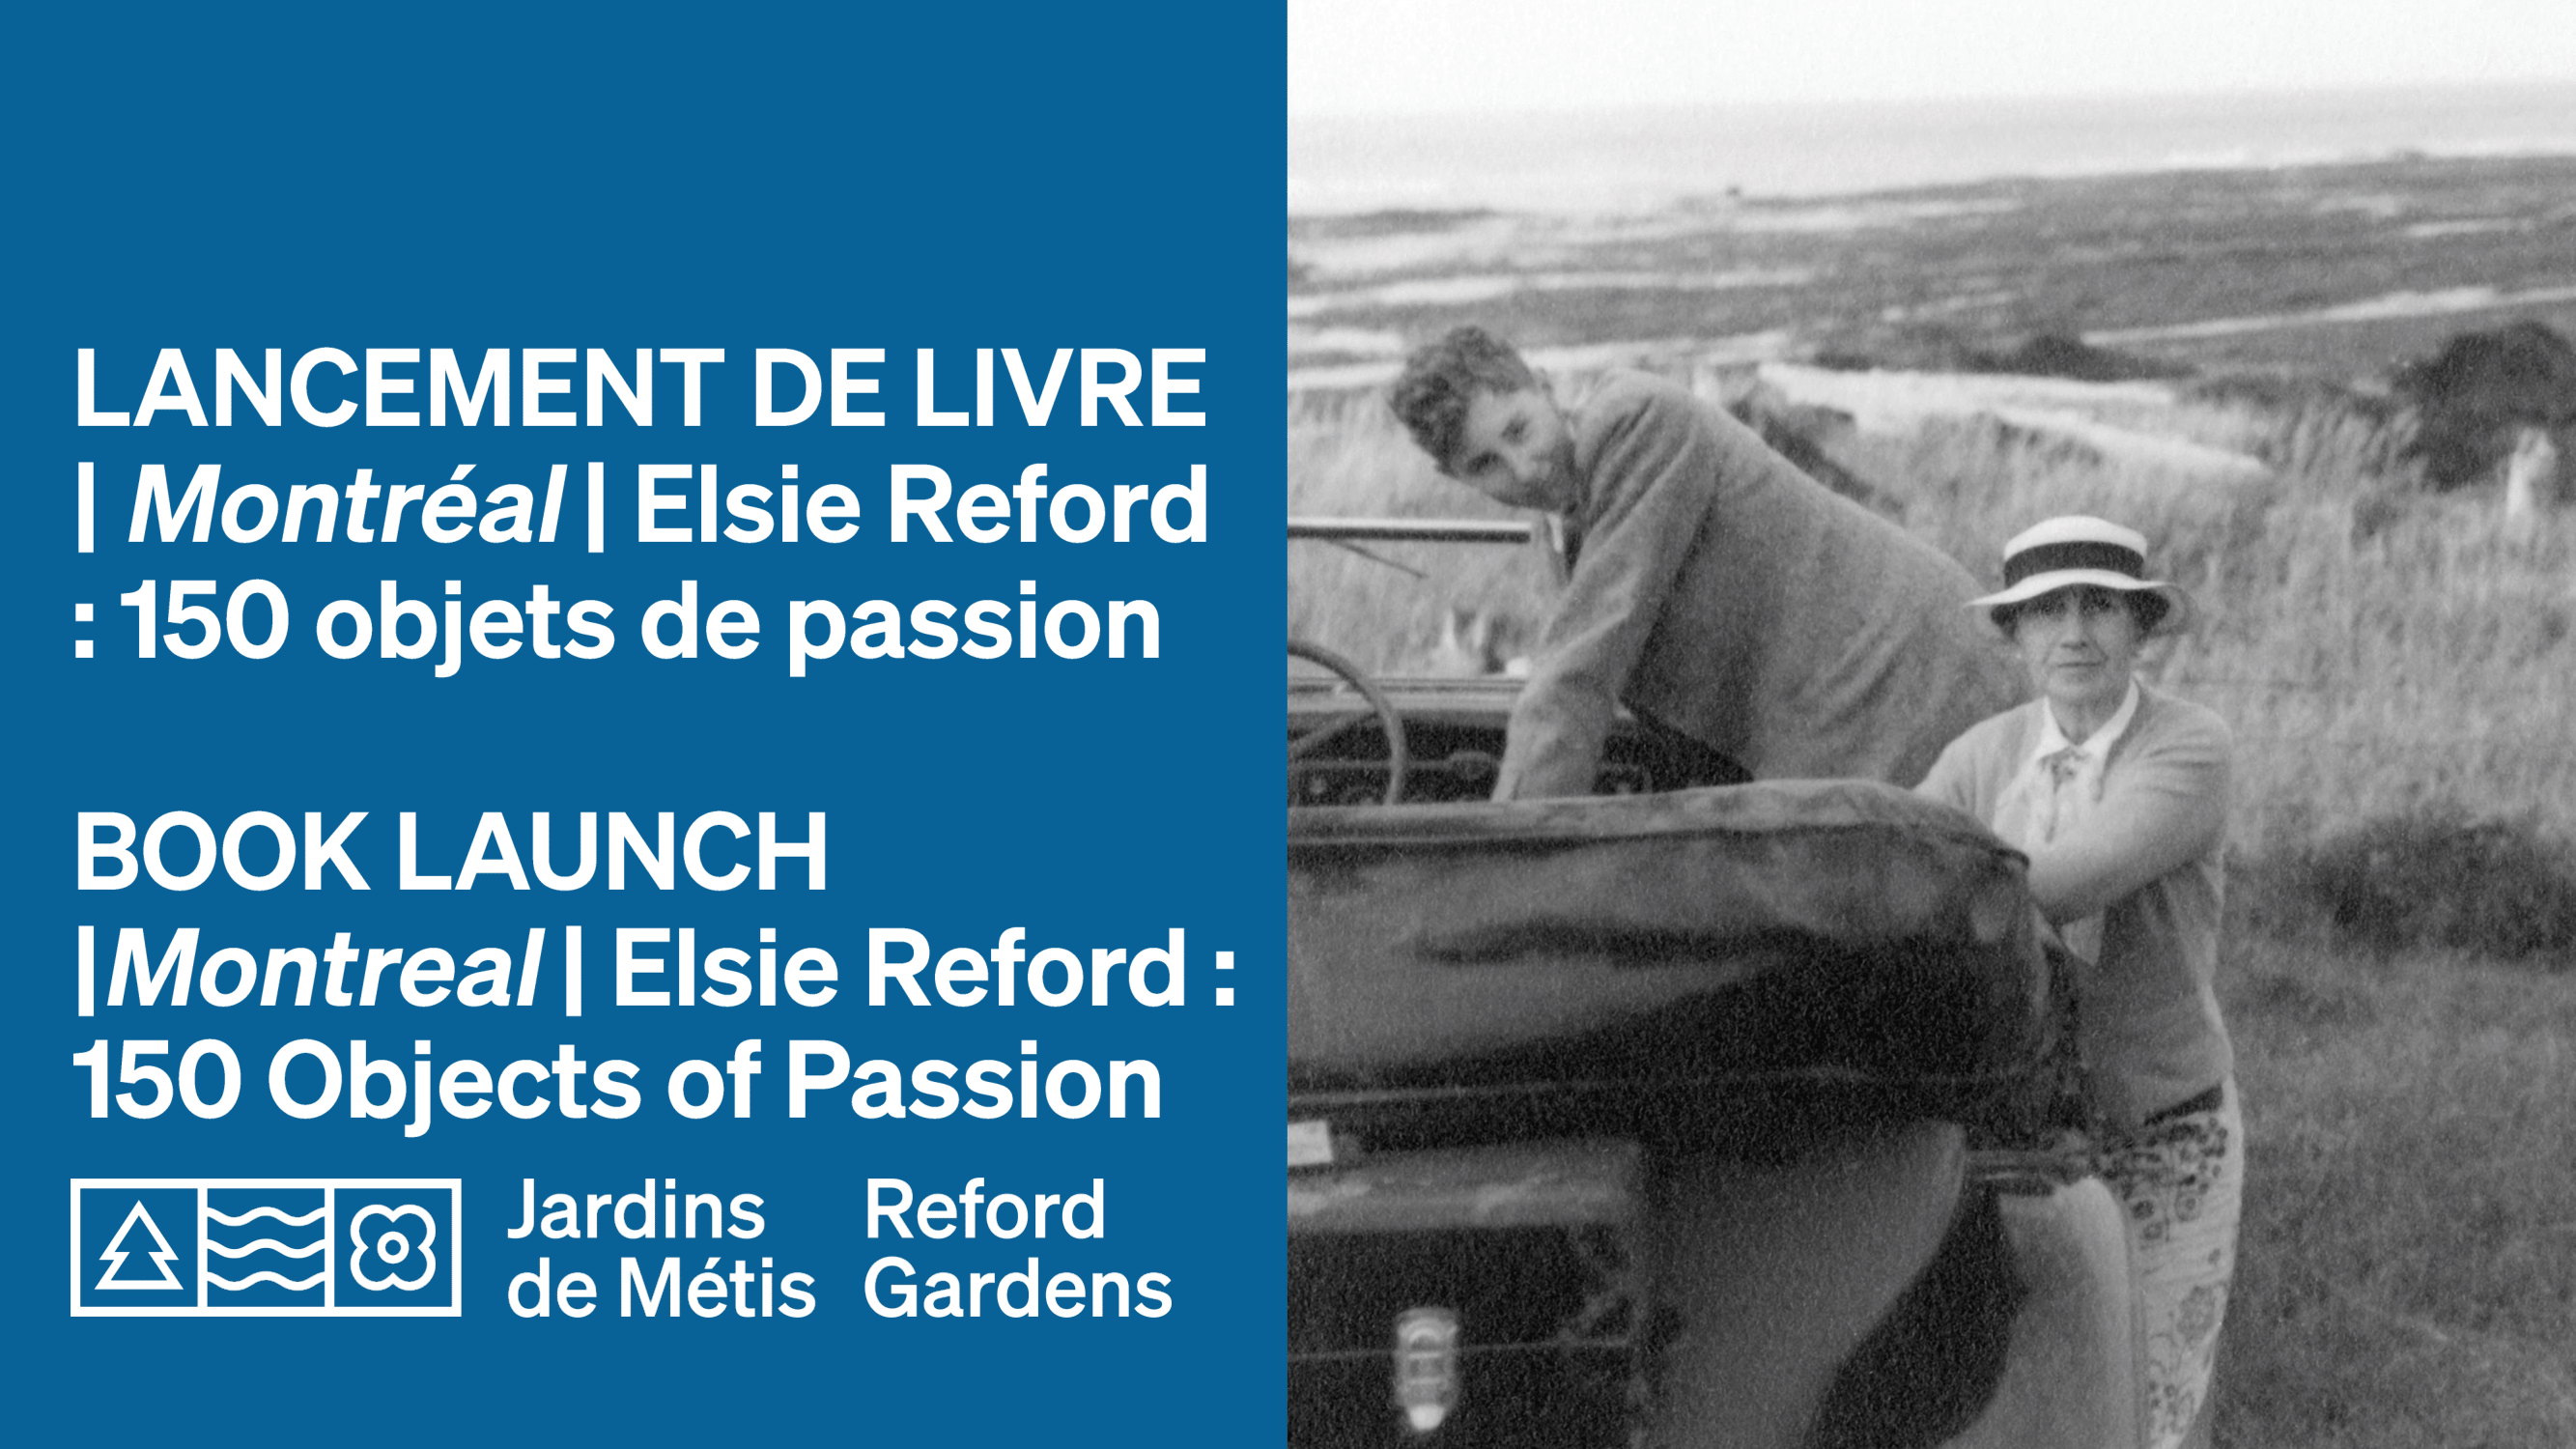 BOOK LAUNCH | Montreal | Elsie Reford : 150 Objects of Passion